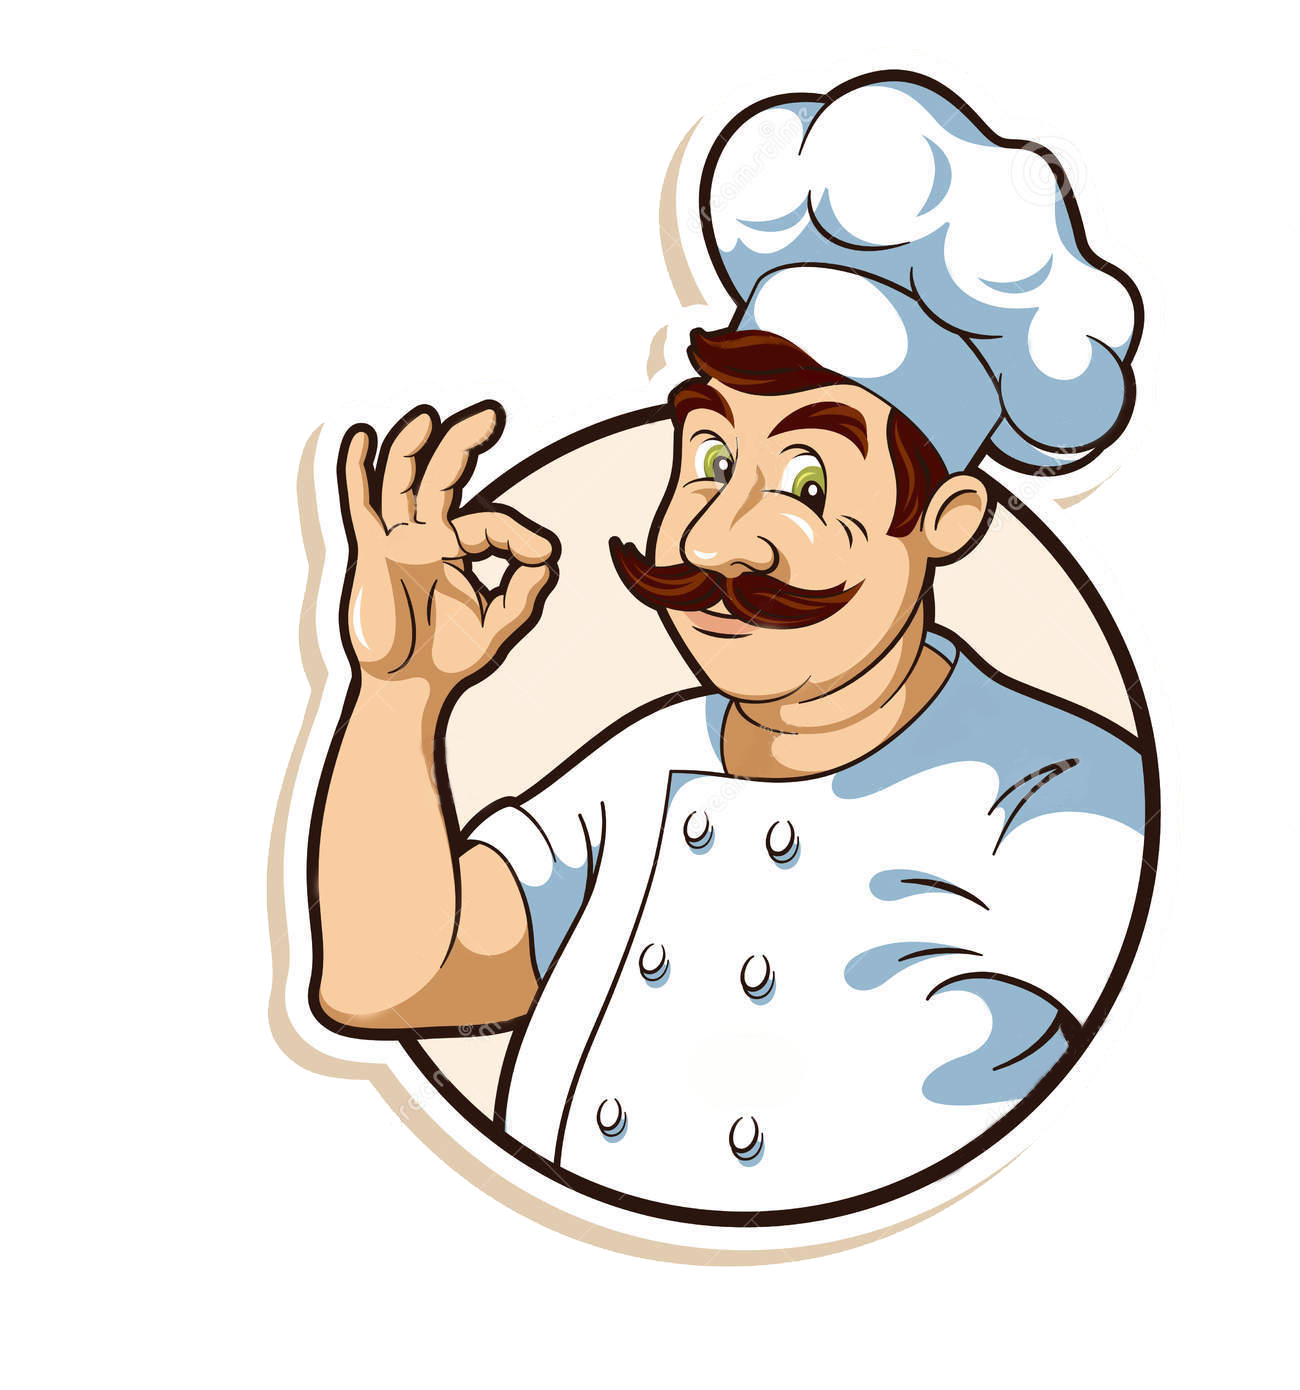 png psd download chef cook vector illustration #14485